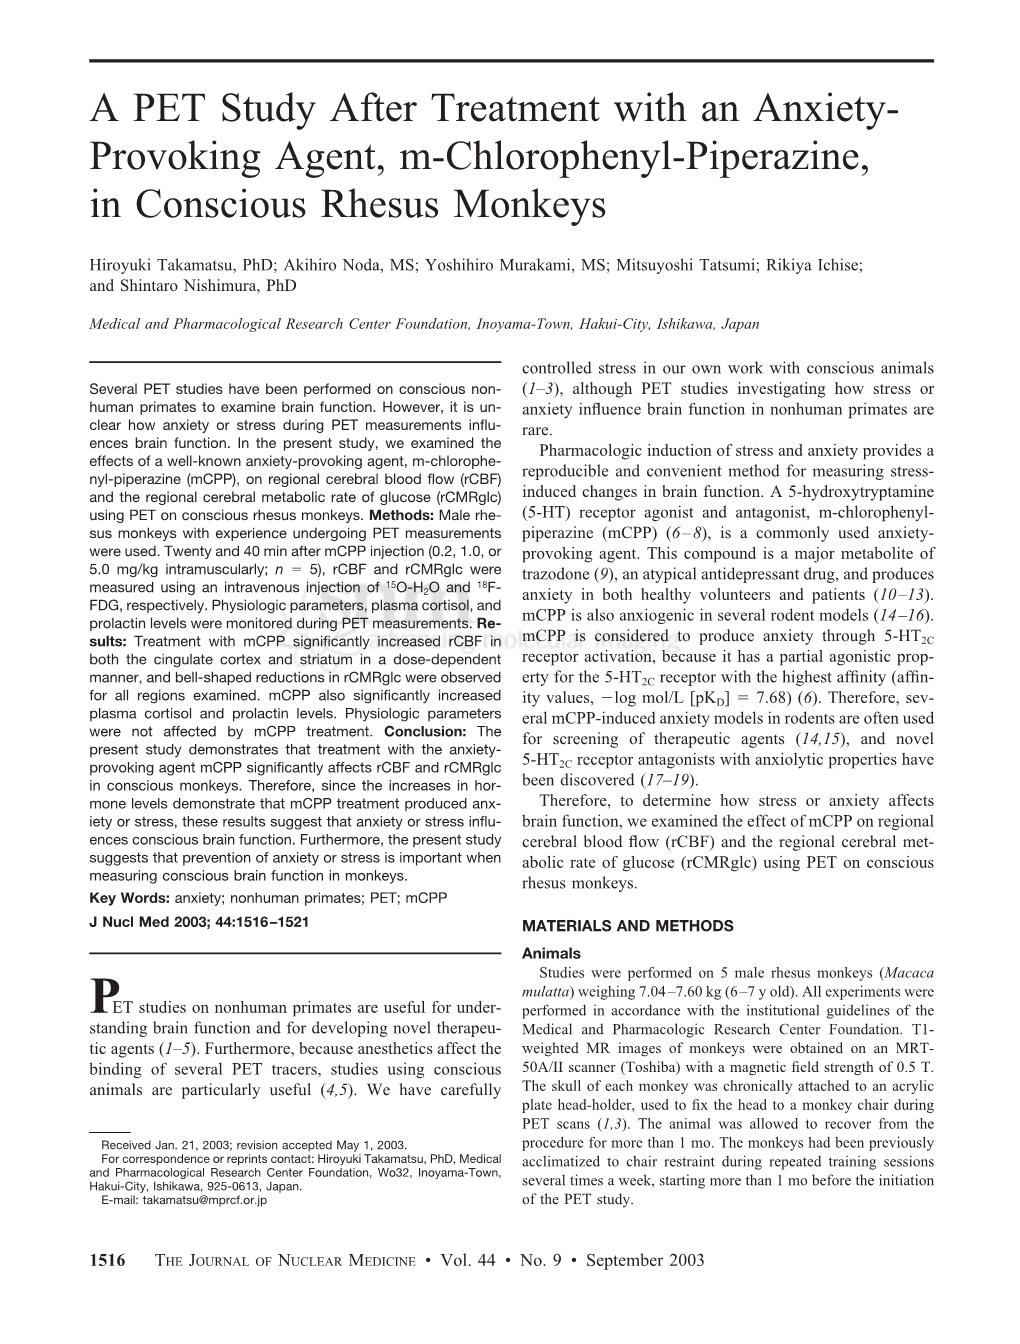 A PET Study After Treatment with an Anxiety- Provoking Agent, M-Chlorophenyl-Piperazine, in Conscious Rhesus Monkeys